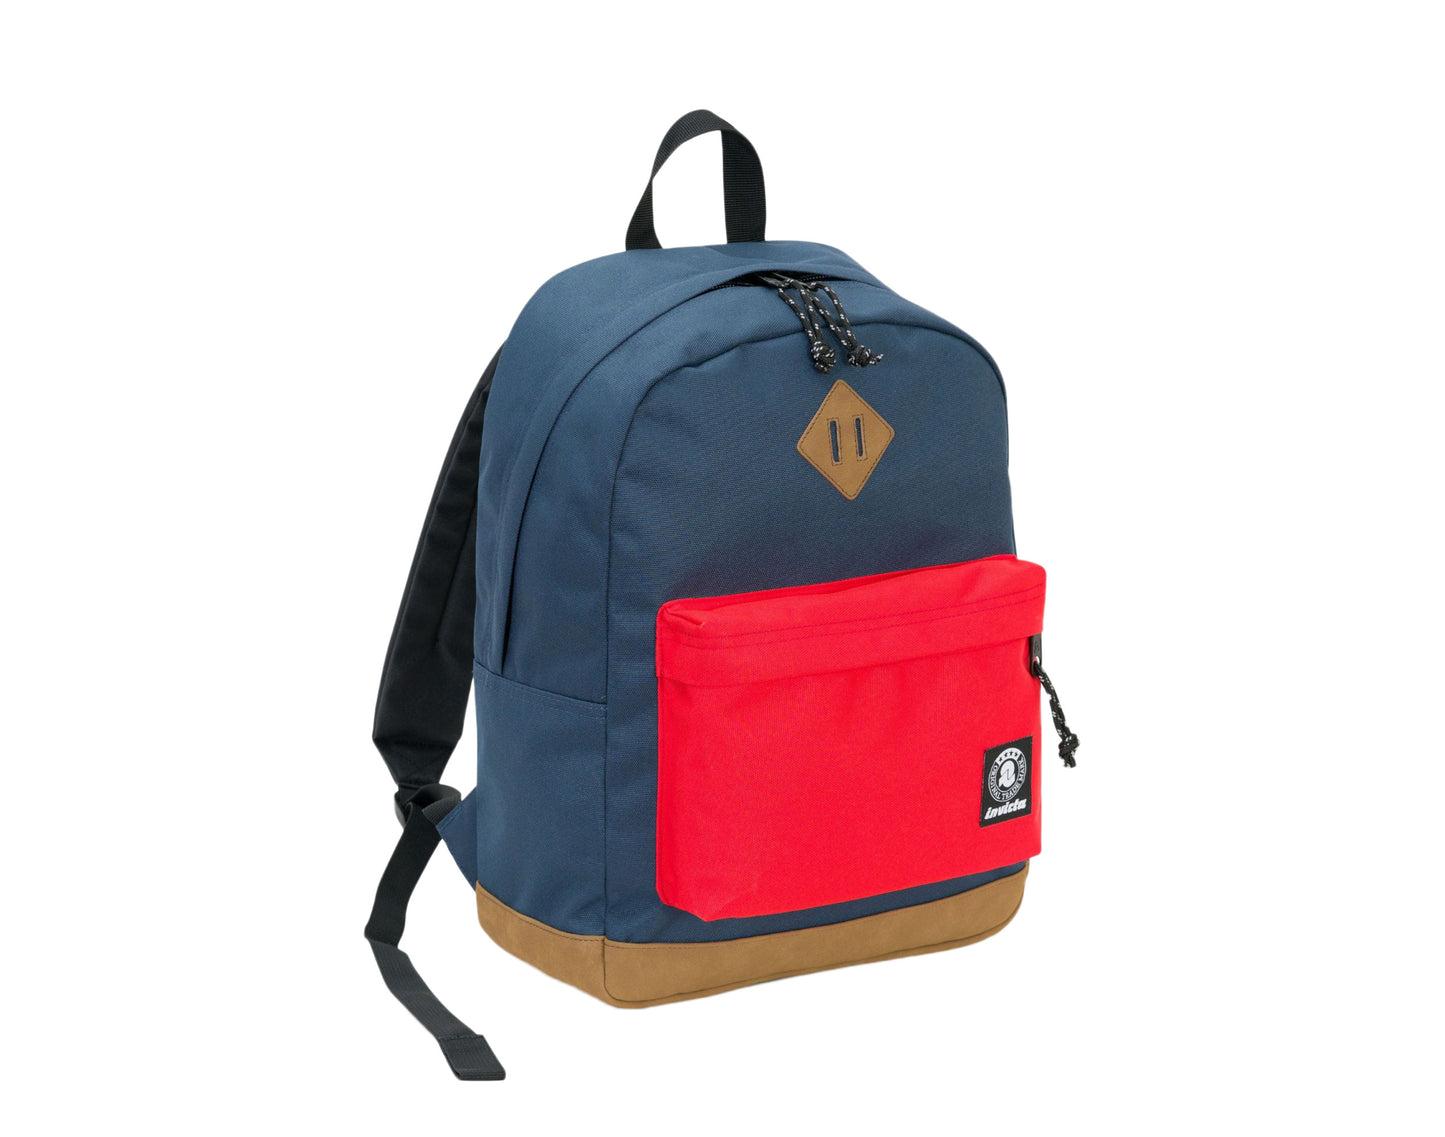 Invicta Carlson Orion Blue/Fiesta Red Backpack 206001907-BF8